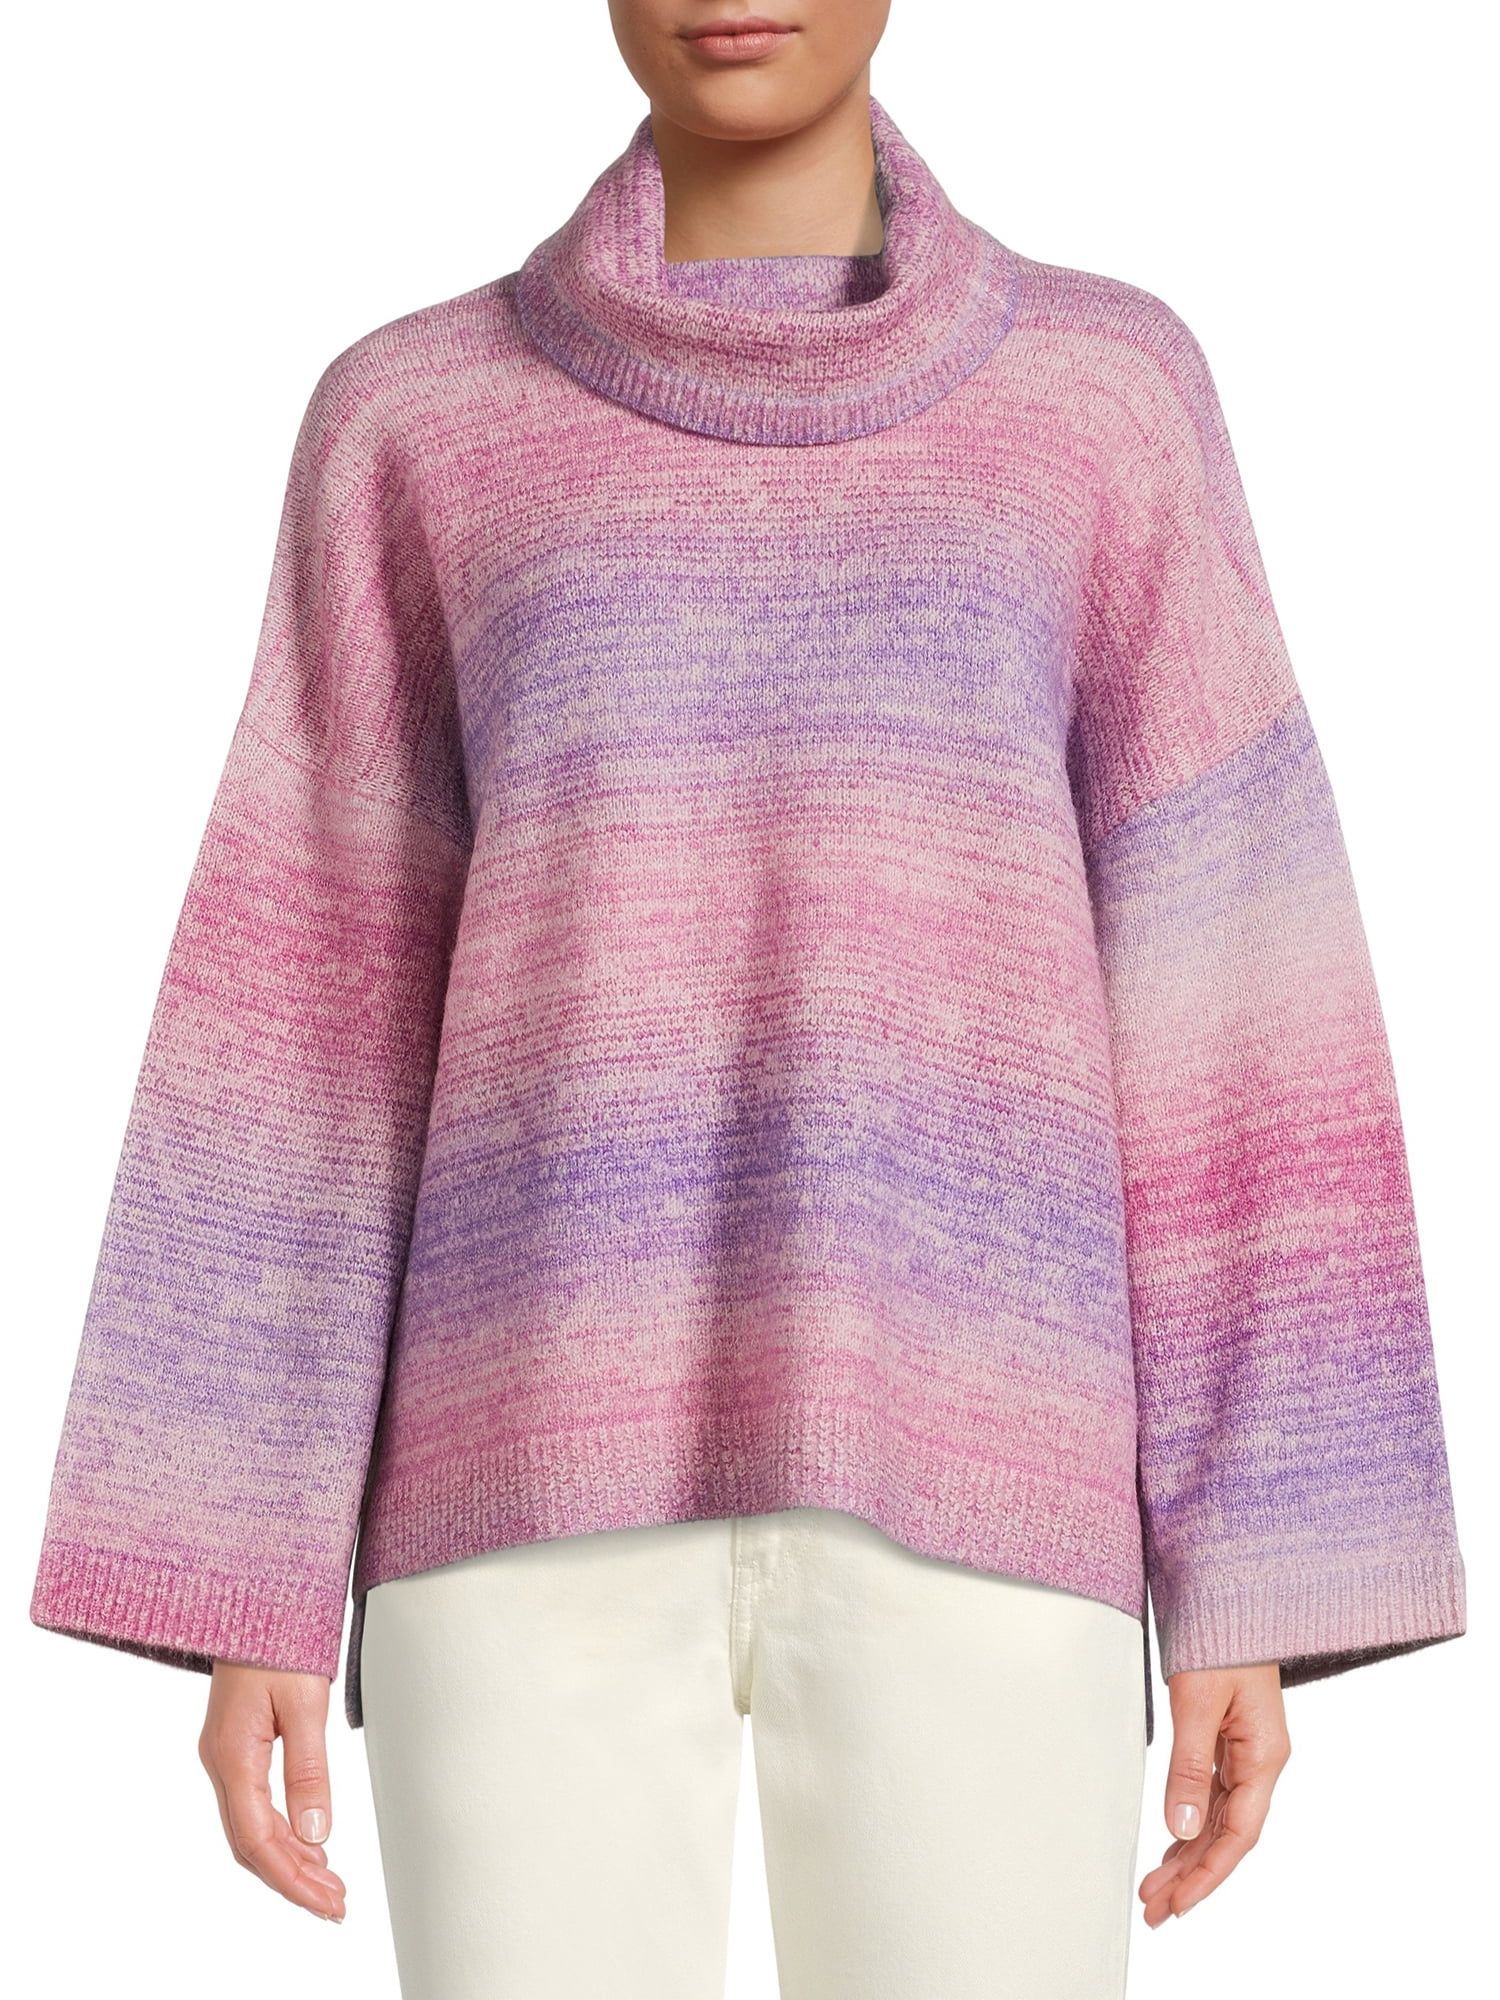 Time and Tru Women's Ombre Cowl Neck Pullover Sweater, Midweight, Sizes XS-XXXL | Walmart (US)